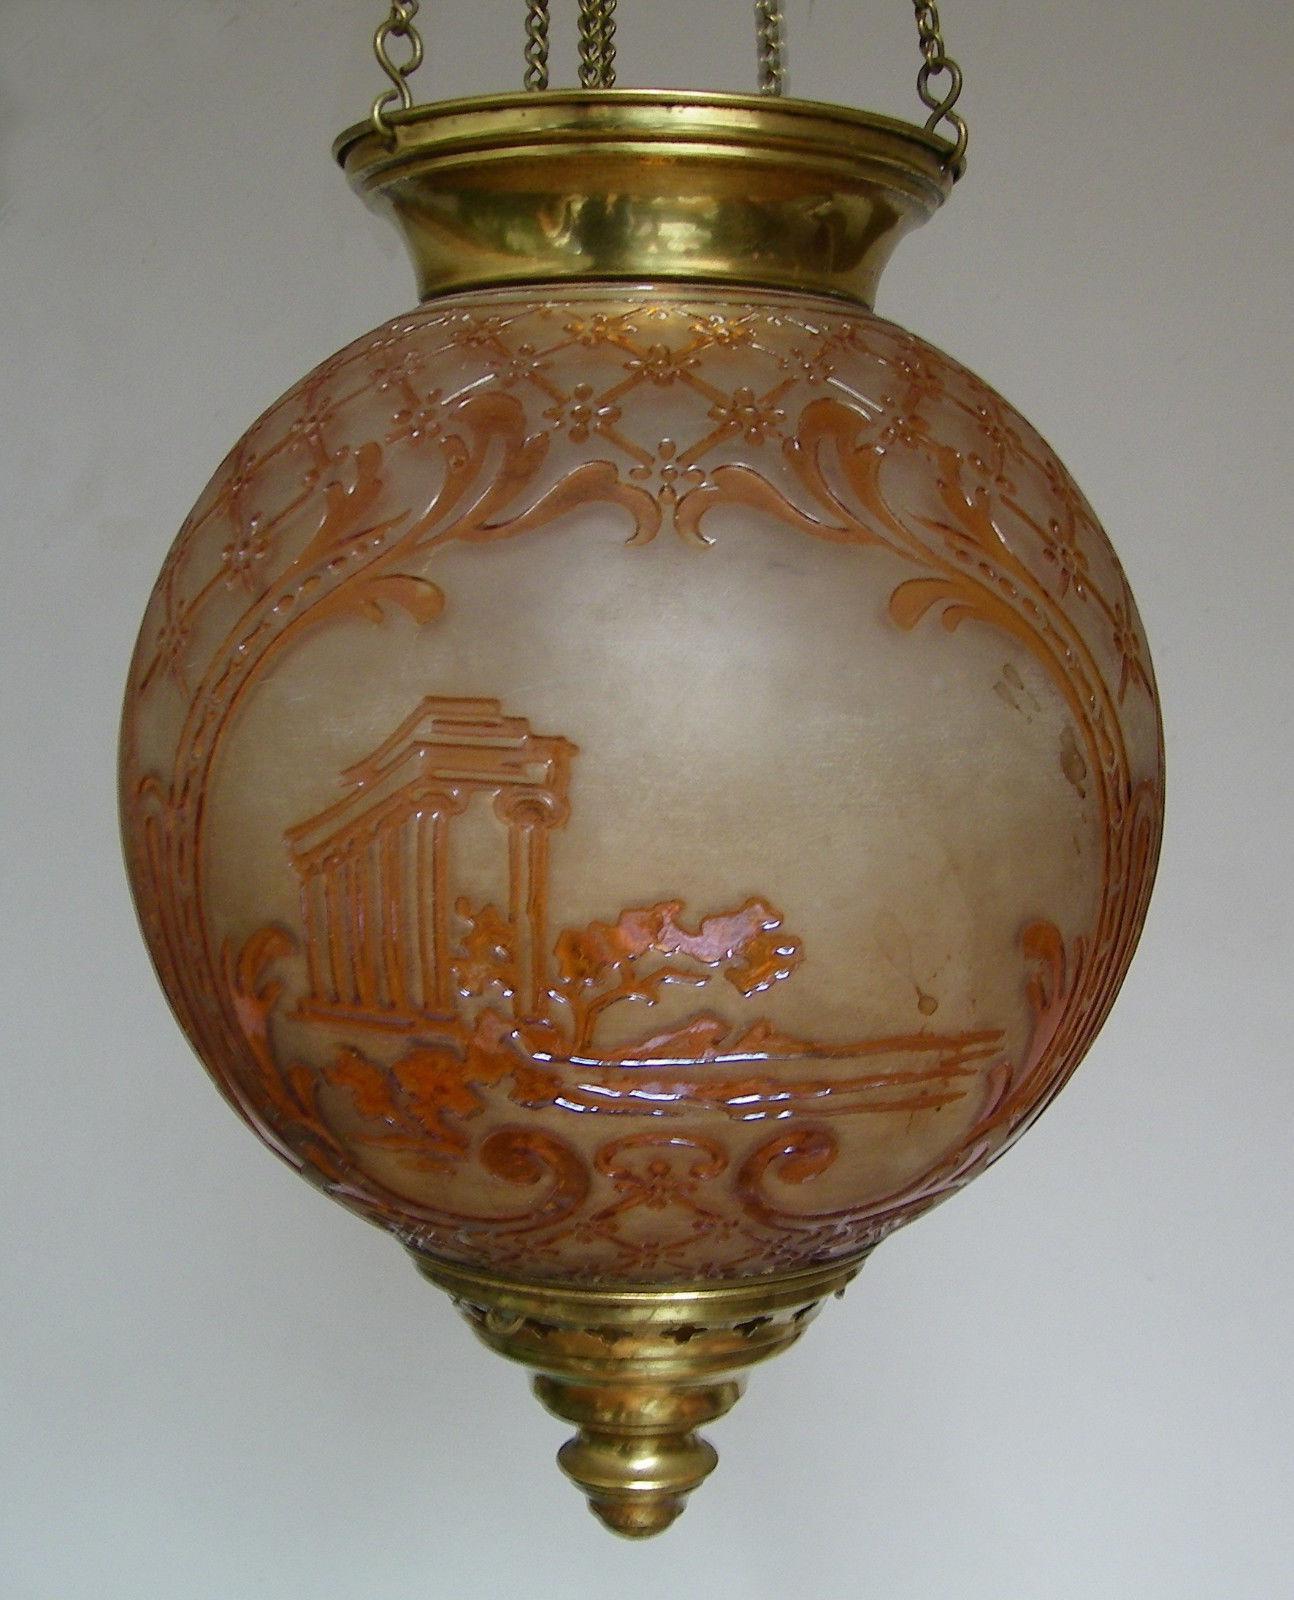 c1890 Napoleon III Crystal Hanging Lantern by Baccarat France. Country scenes on one side of the globe lantern and Roman ruin scenes on the other side. Brass mounts. This piece is documented in Metropolitan Museum of Arts rare book titled